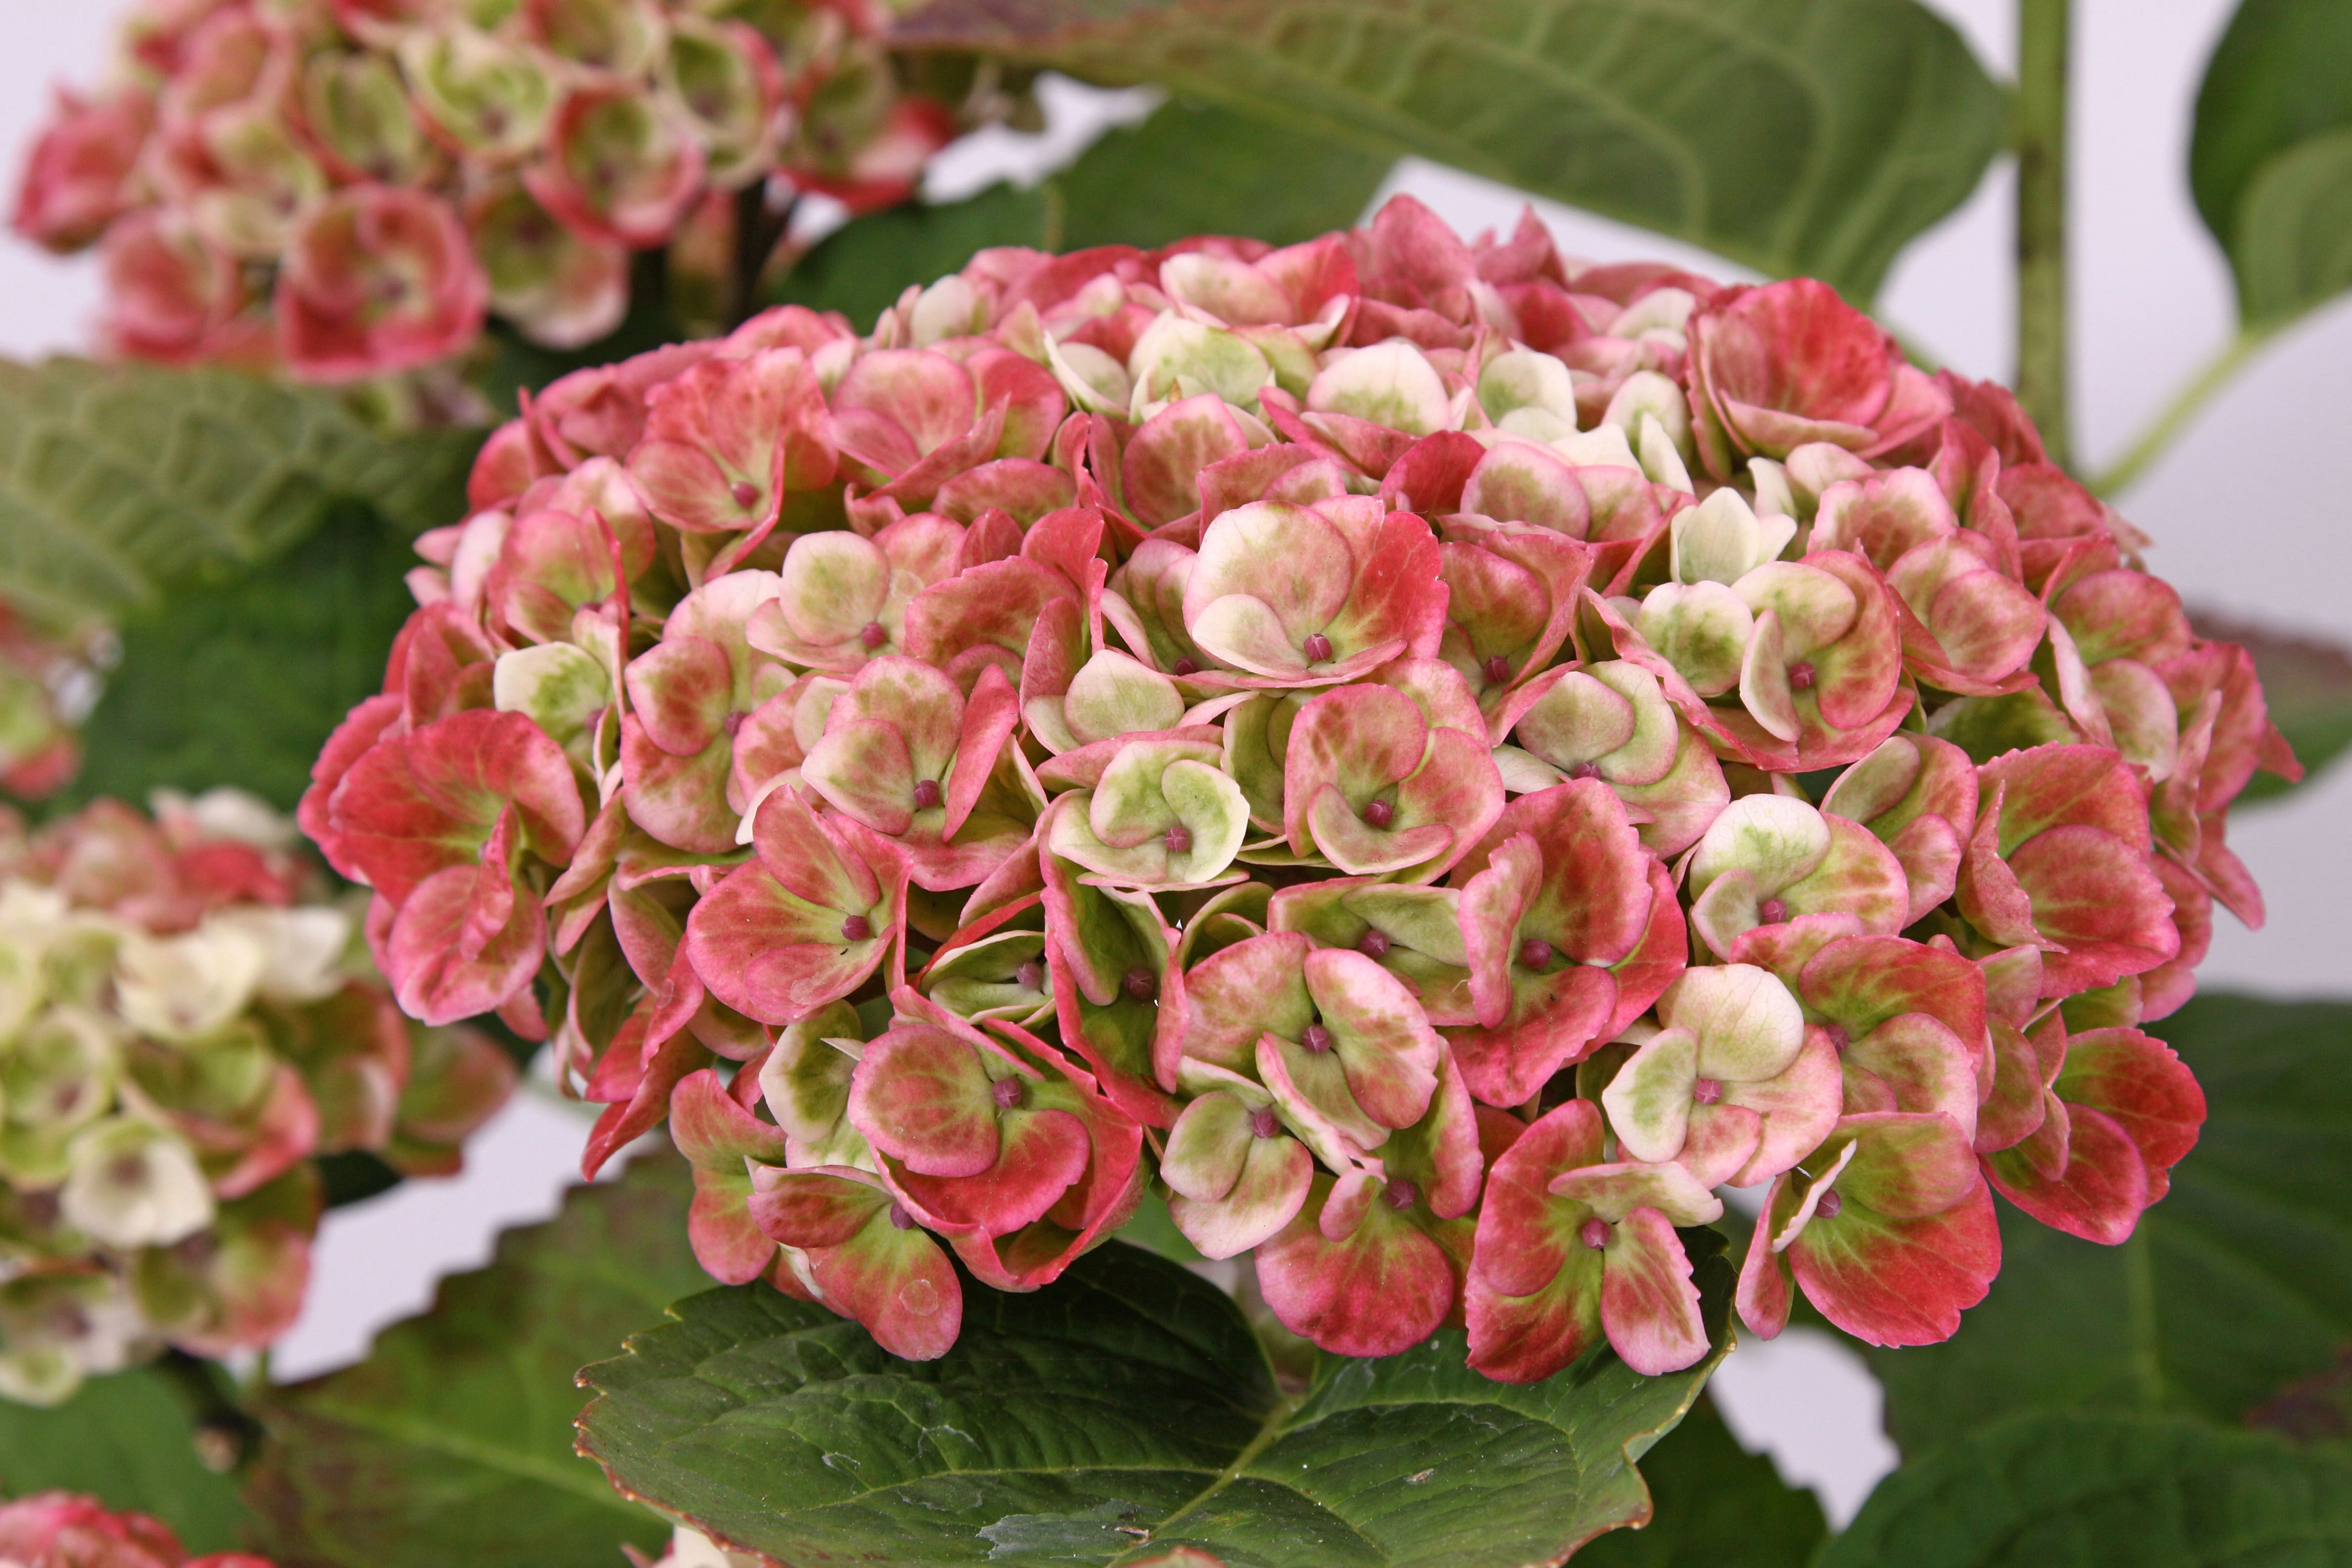 images/plants/hydrangea/hyd-magical-everlasting-revolution/hyd-magical-everlasting-revolution-0090.jpg